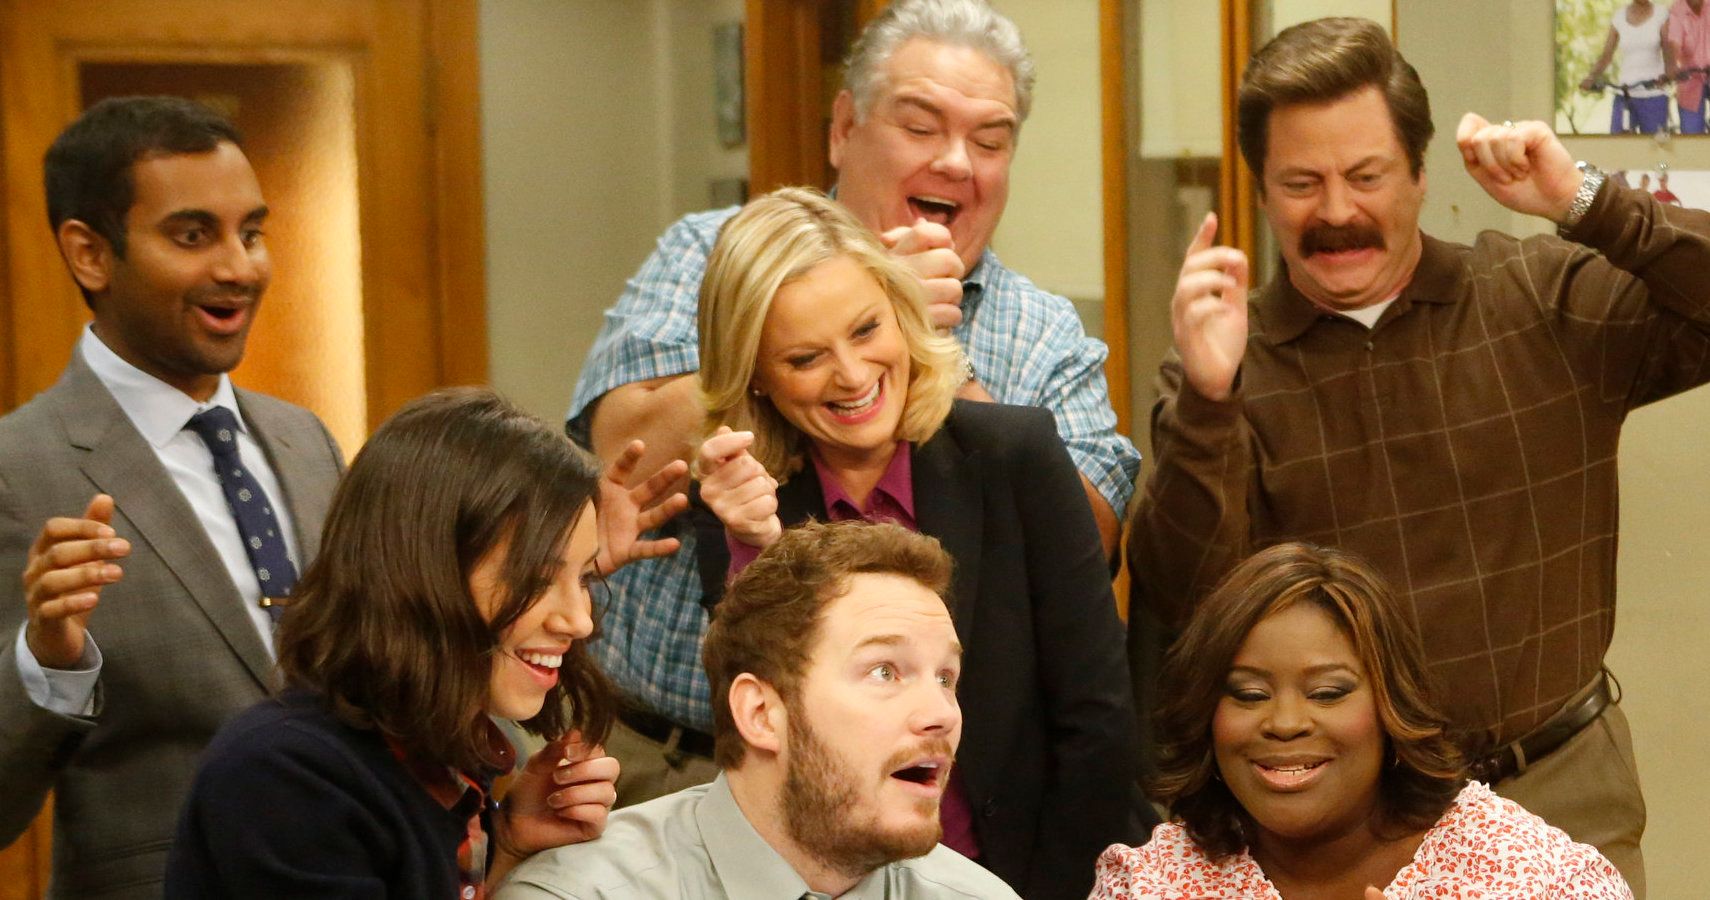 10 Most Hilarious Workplace Comedy Moments Ranked